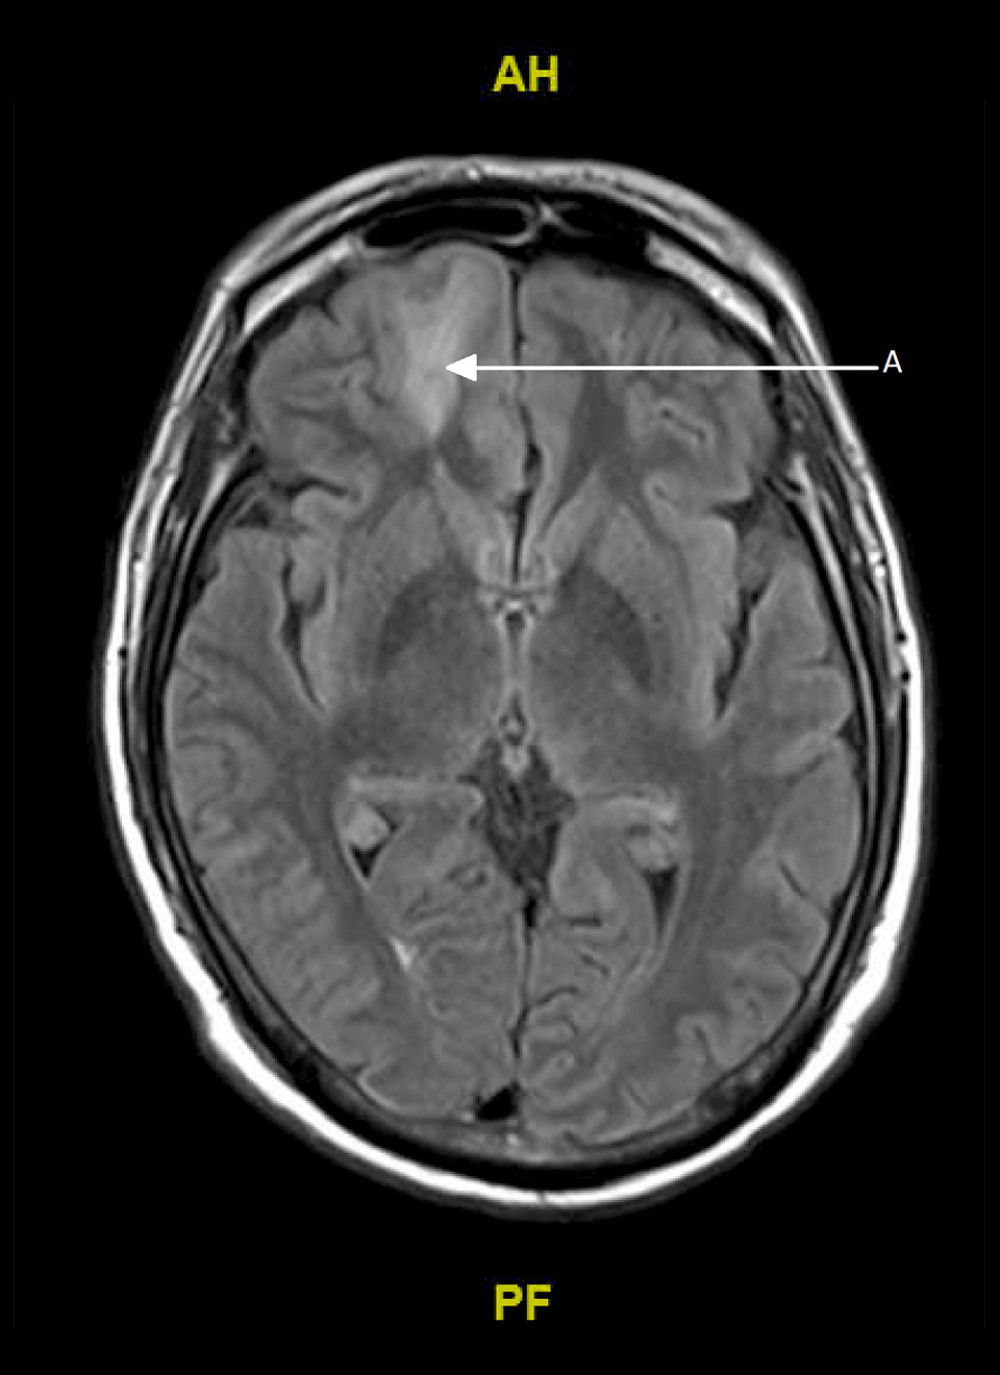 MRI with contrast, week 3. Interval increased abnormal T2/FLAIR signal in the right inferior frontal lobe (arrow A) with peripheral contrast enhancement, worsened compared to prior imaging. Axial FLAIR gadoterate meglumine contrast.